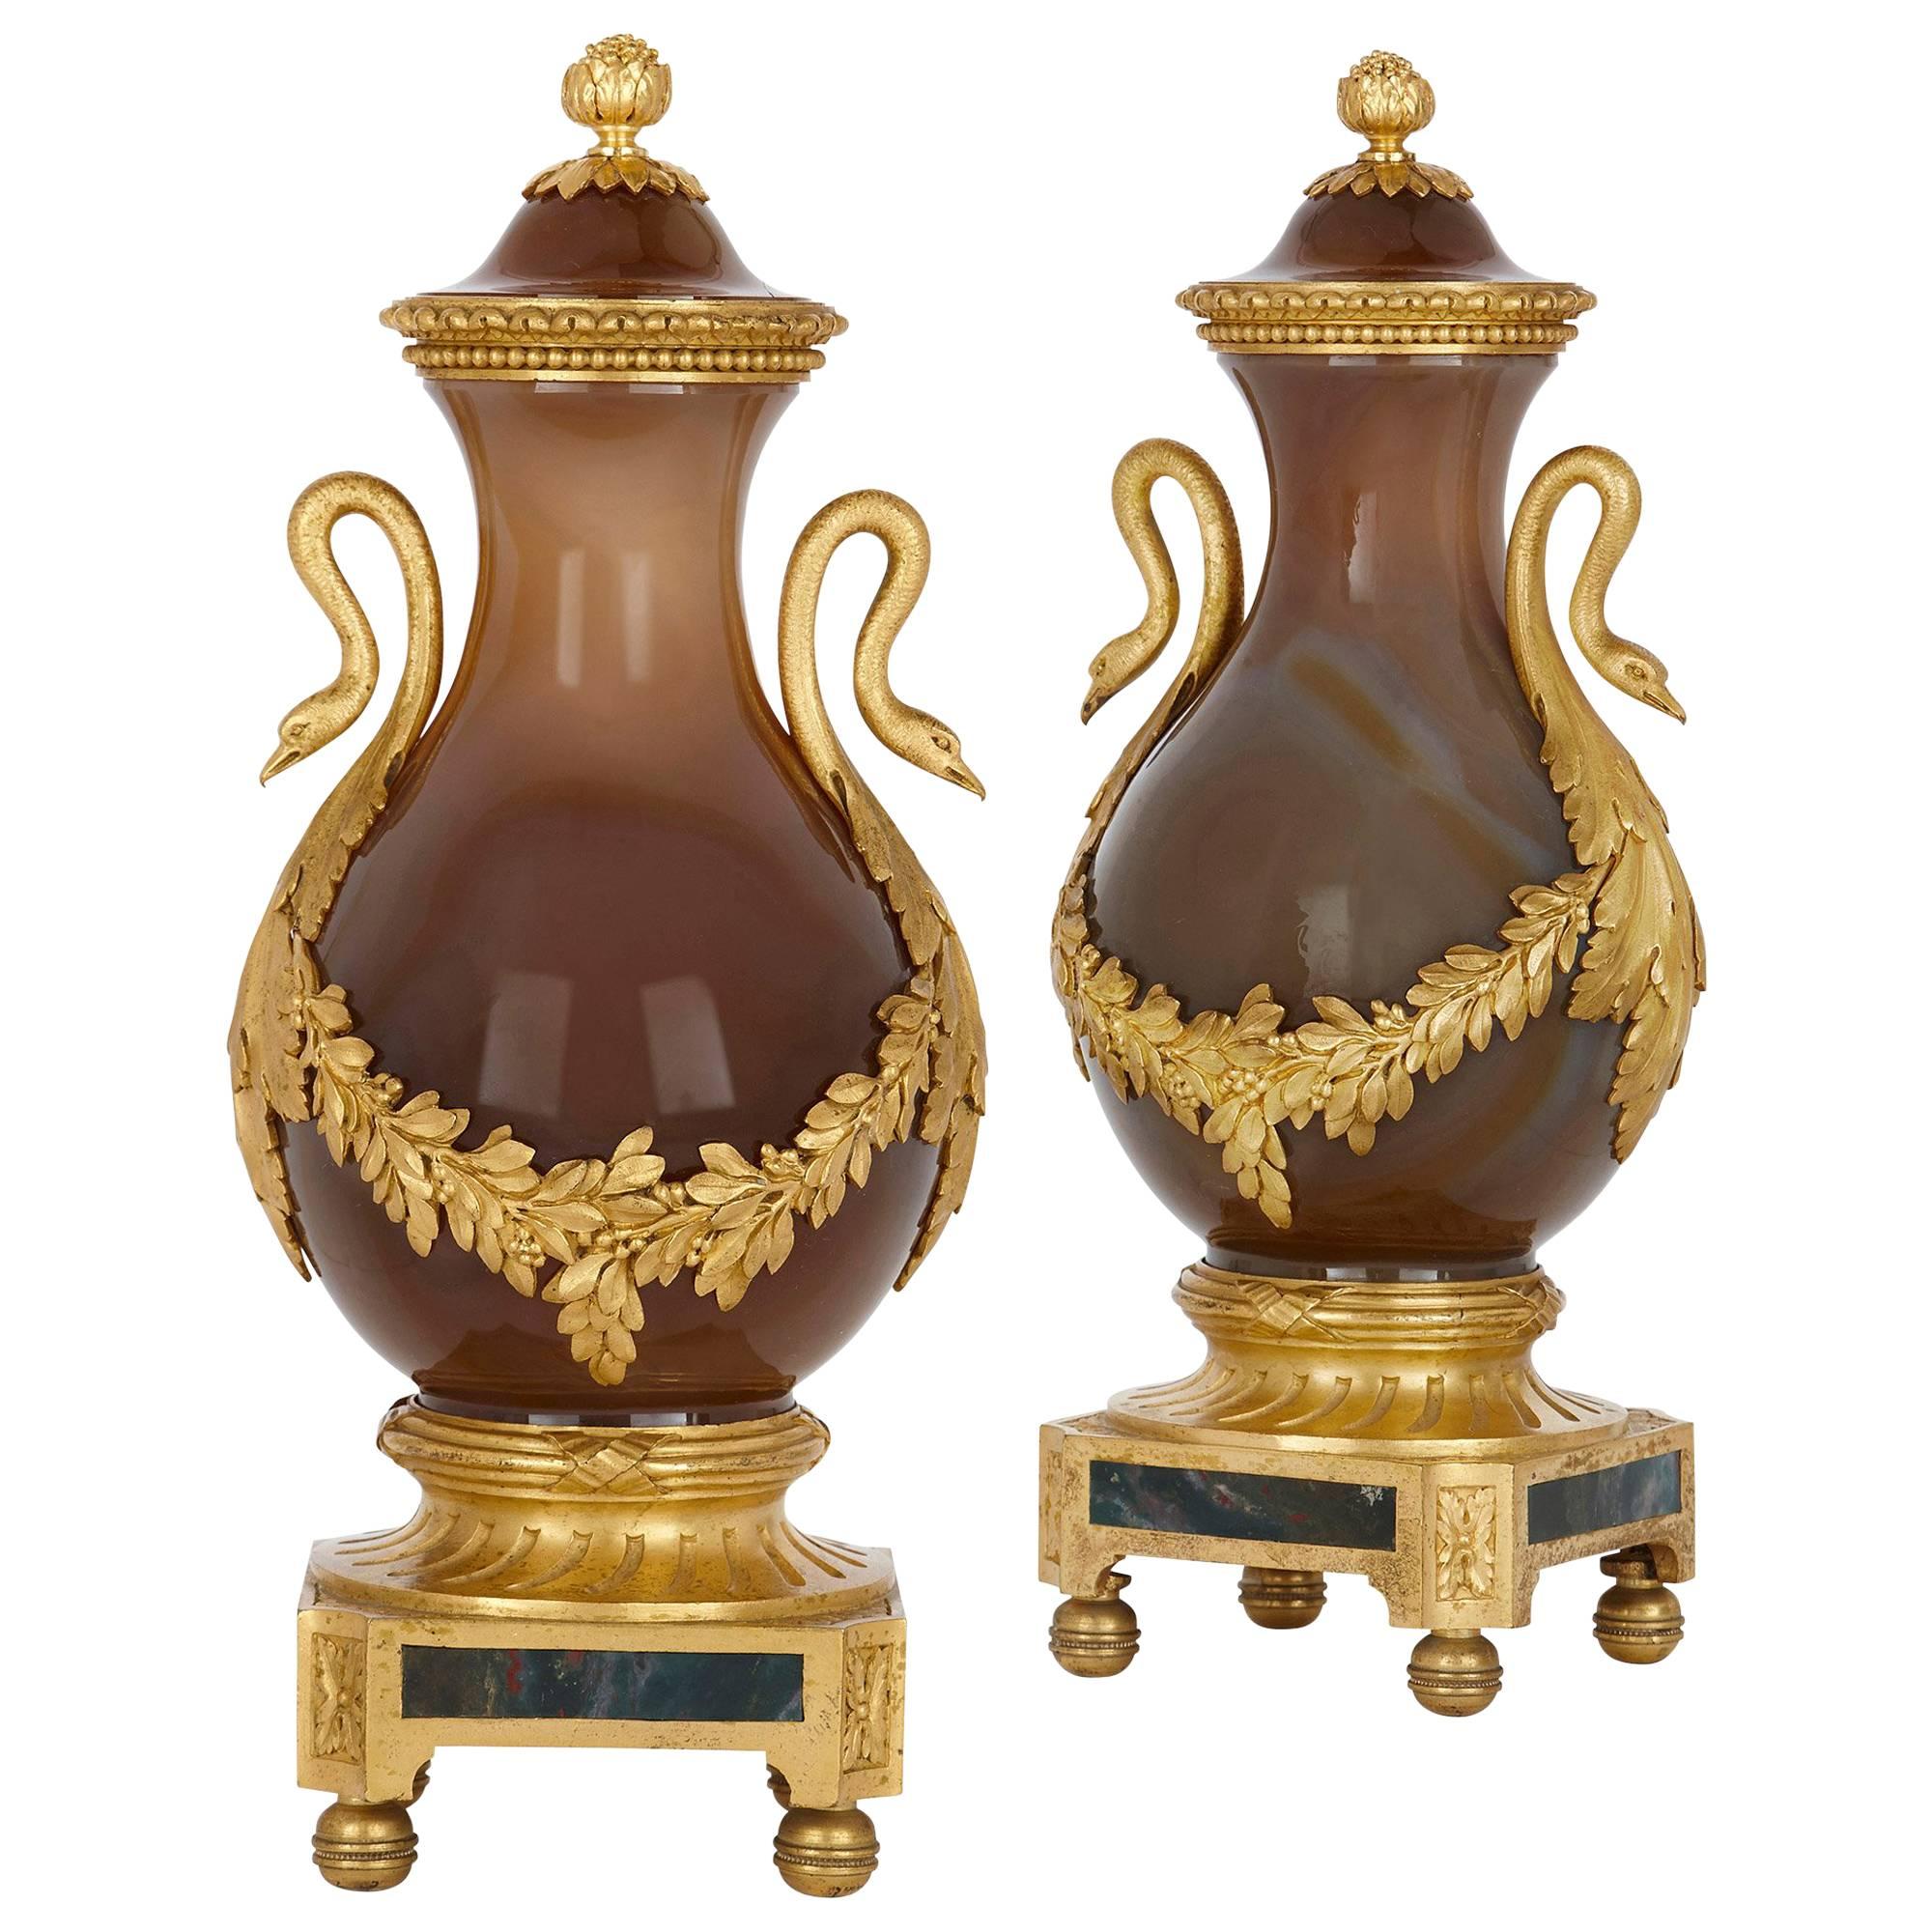 Two Antique Russian Agate and Gilt Bronze Vases